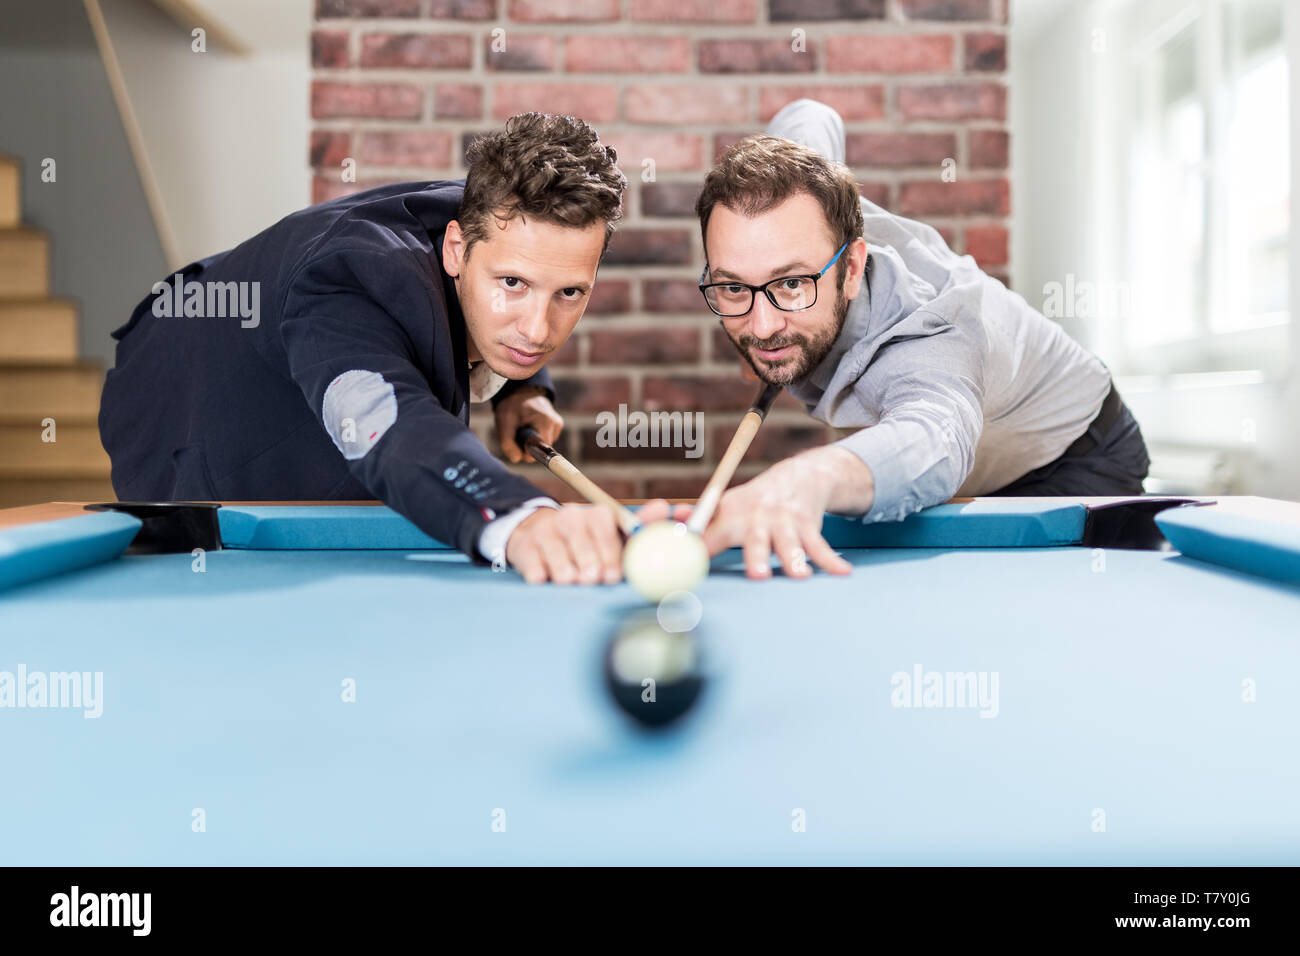 Group Young Cheerful Friends Playing Billiards Funny Time Work Stock Photo  by ©Romaset 316360520